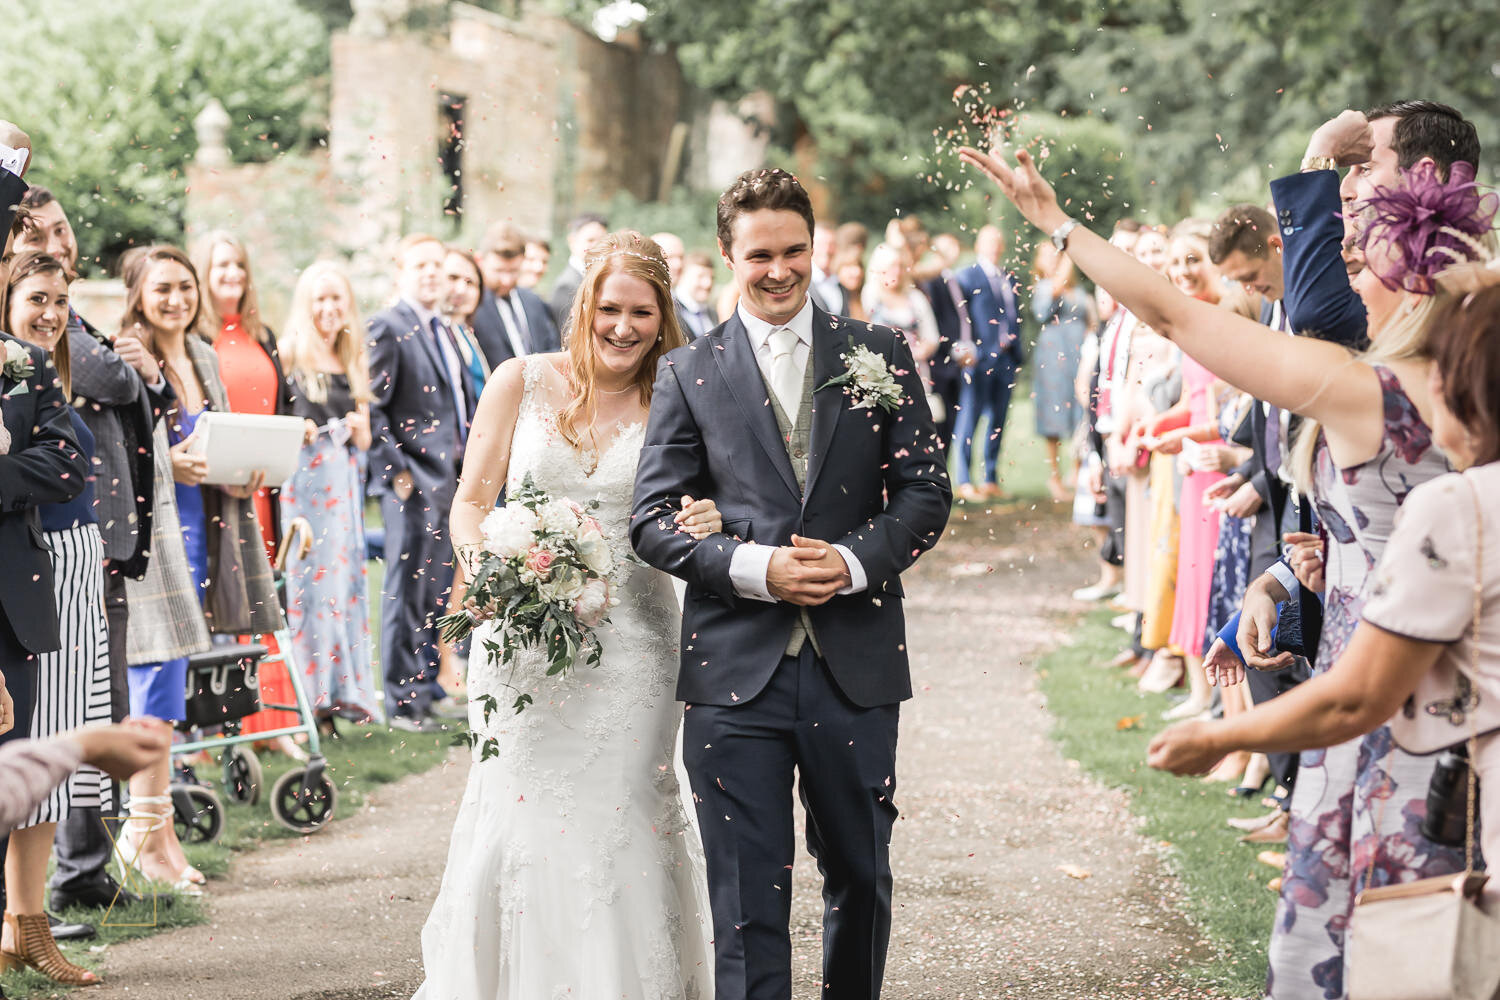 Bride-and-groom-covered-in-confetti-St-James-Gawsworth-wedding